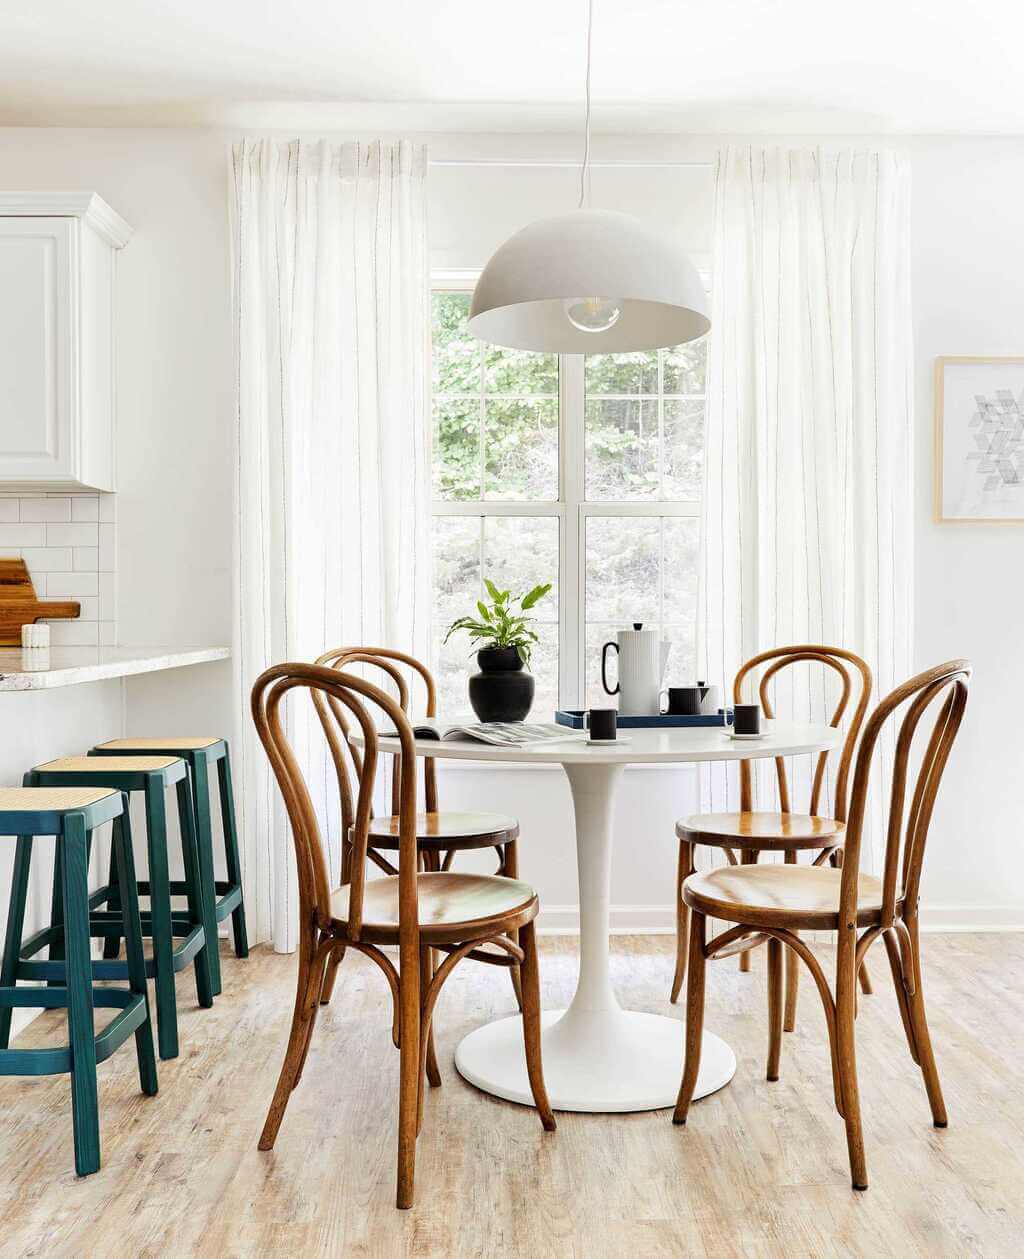 Top 7 Interesting Dining Room Trends That You’ll See in 2022